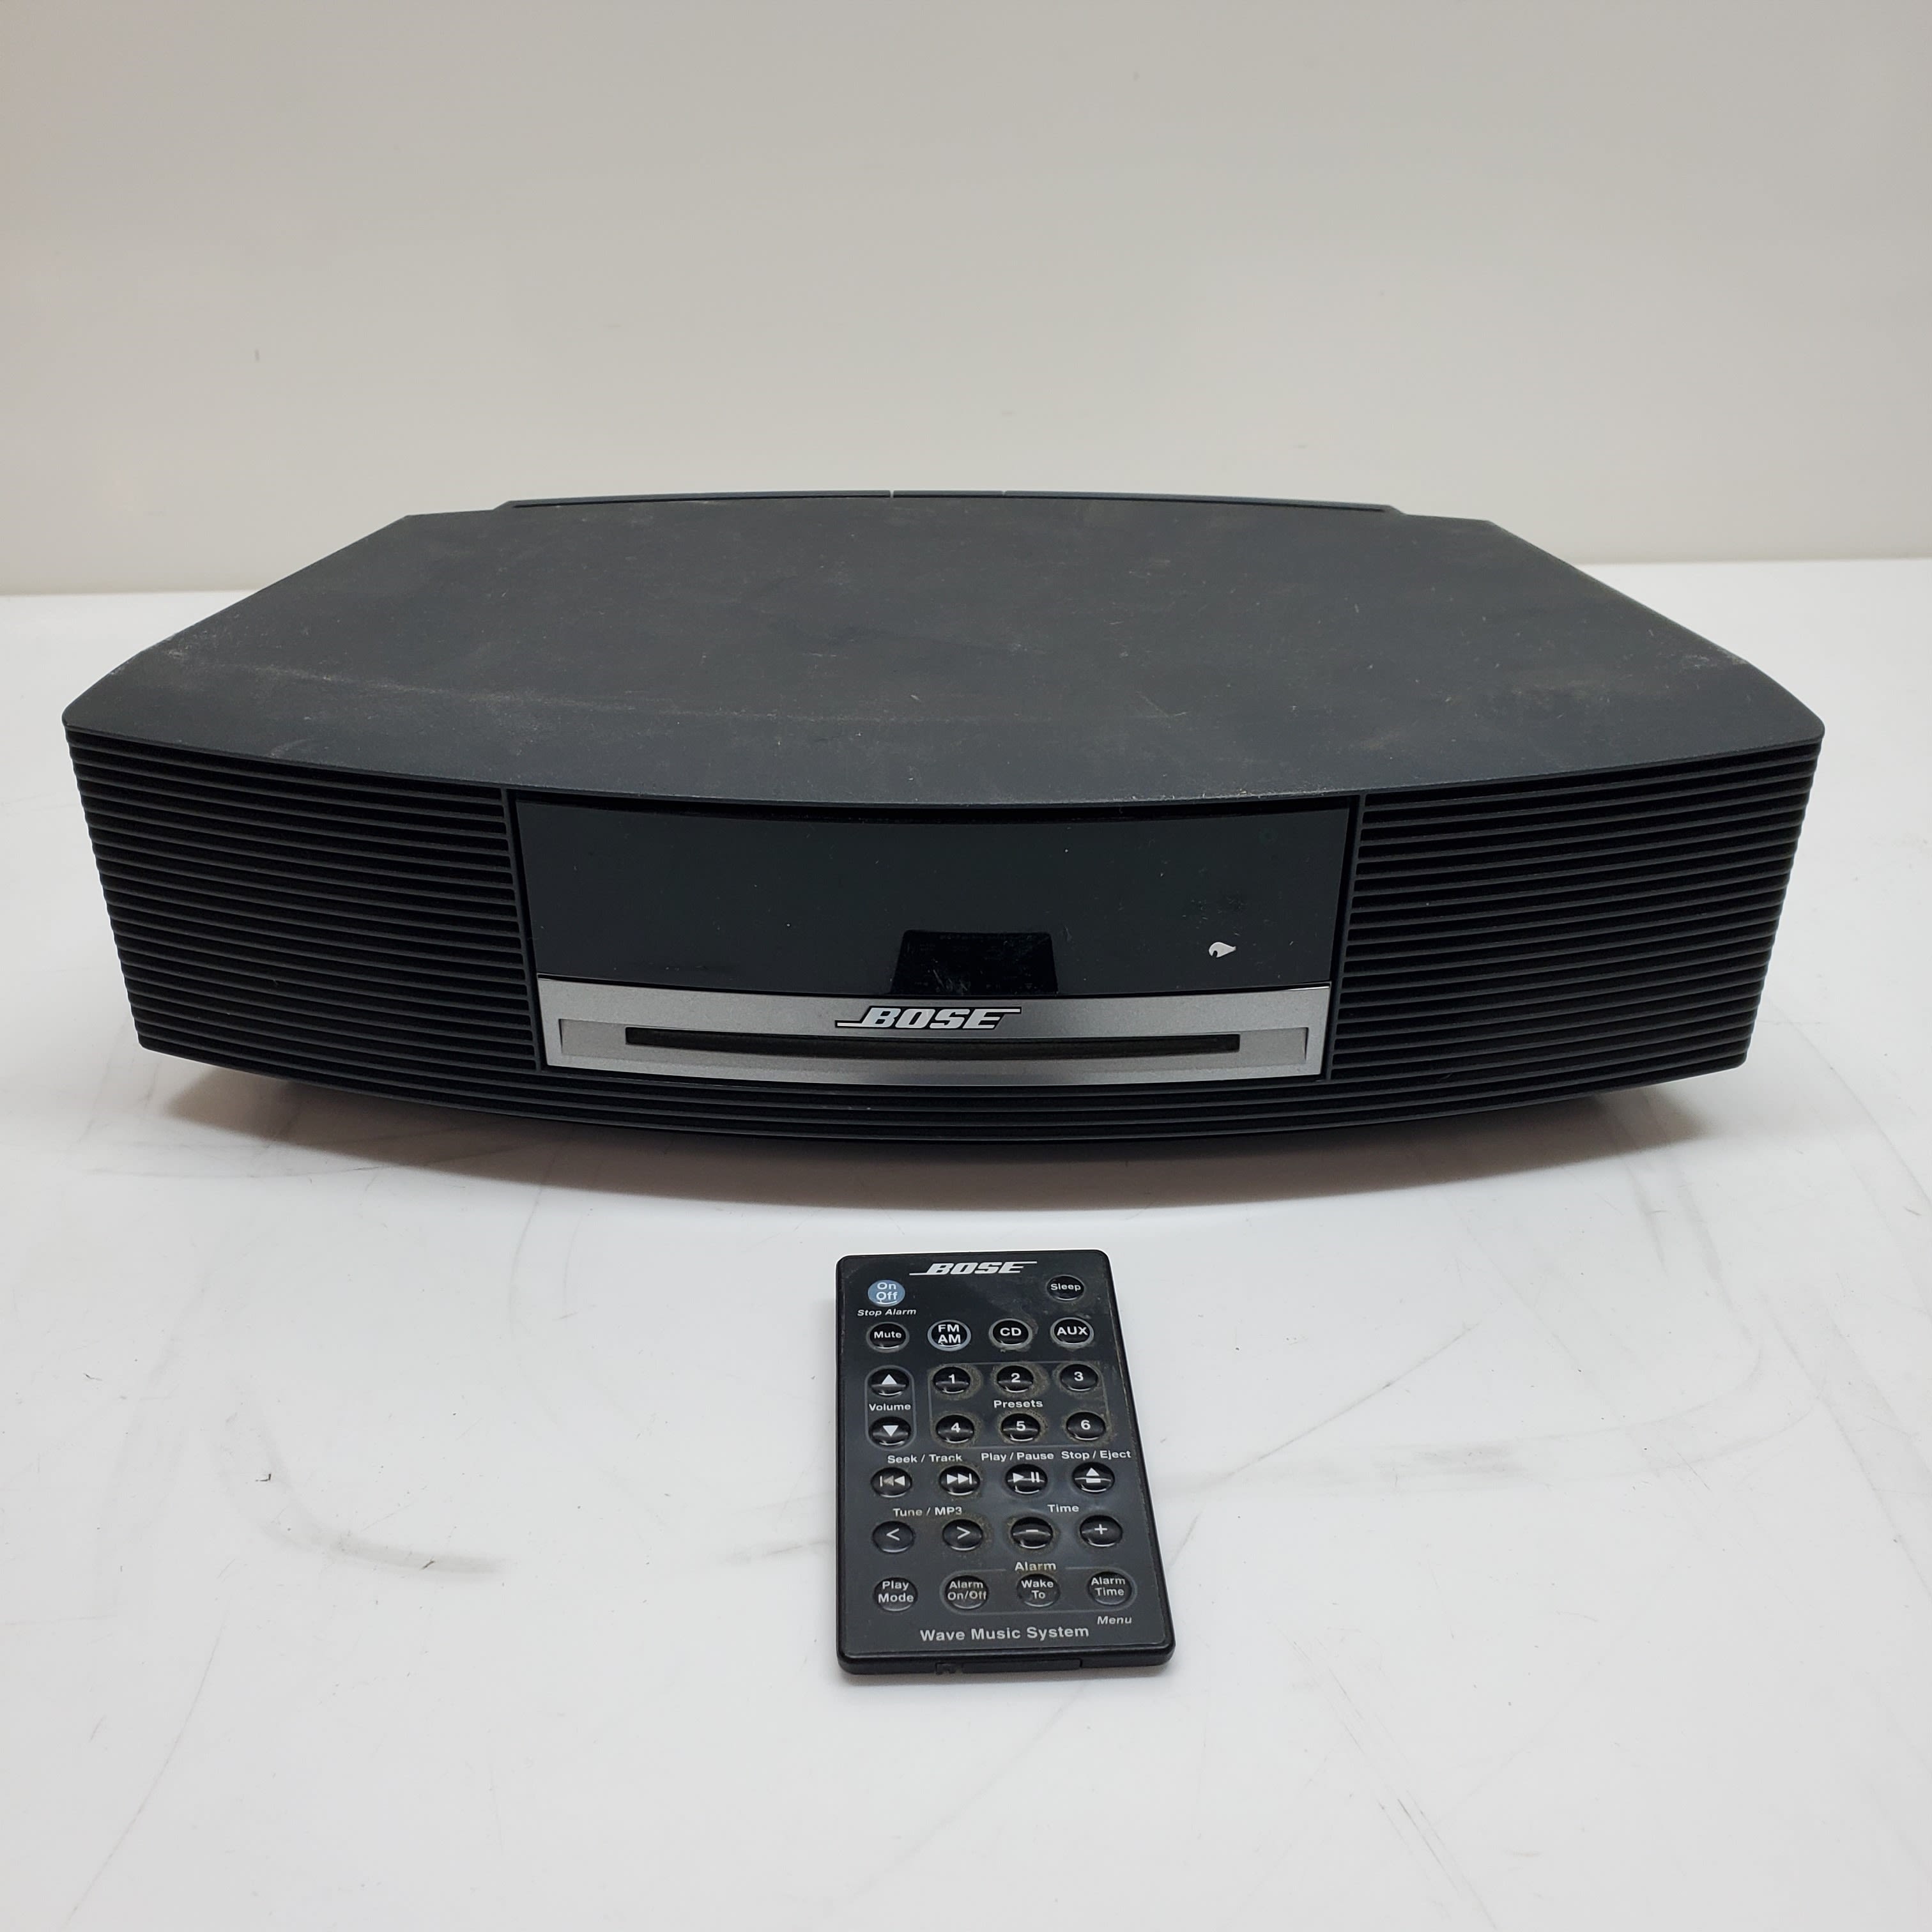 Buy Bose WAVE Music System with Remote Model No. AWRCC1 Untested for  Parts/Repair for USD 89.99 | GoodwillFinds